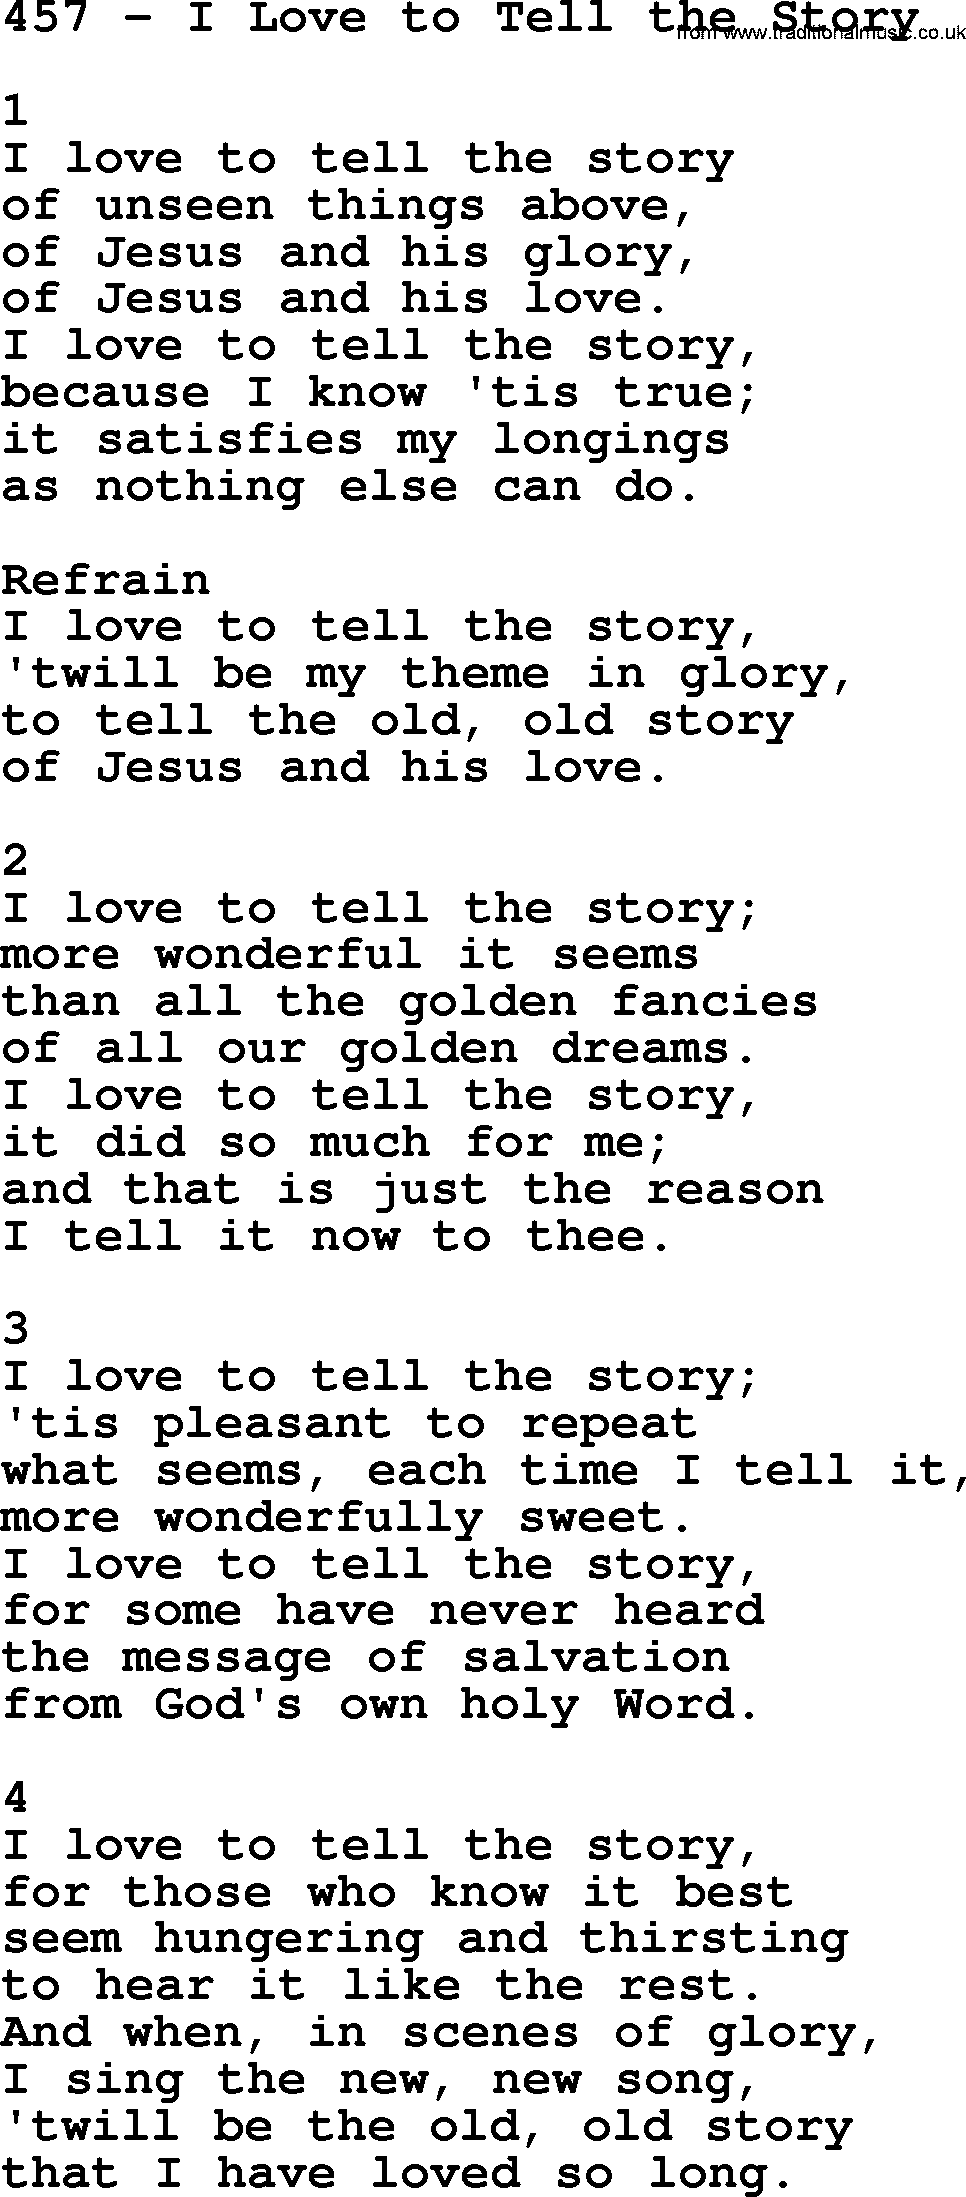 Complete Adventis Hymnal, title: 457-I Love To Tell The Story, with lyrics, midi, mp3, powerpoints(PPT) and PDF,